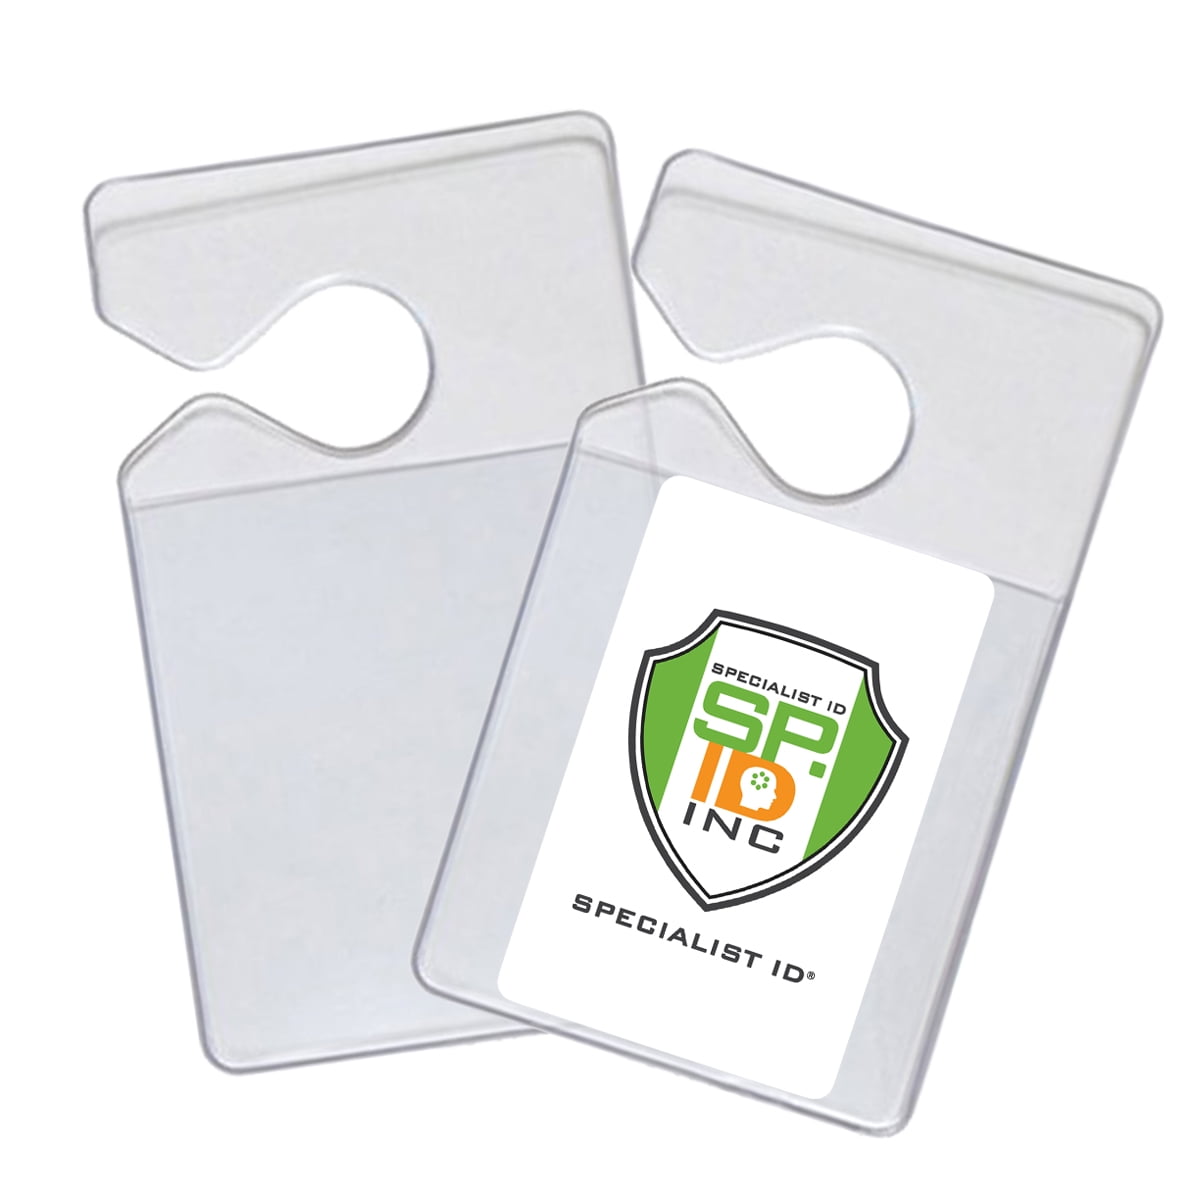 2 Pack - Clear Horizontal Vehicle Parking Permit Pass Hanger Tag Holder - Hangs from Car Rear View Mirror - by Specialist ID 